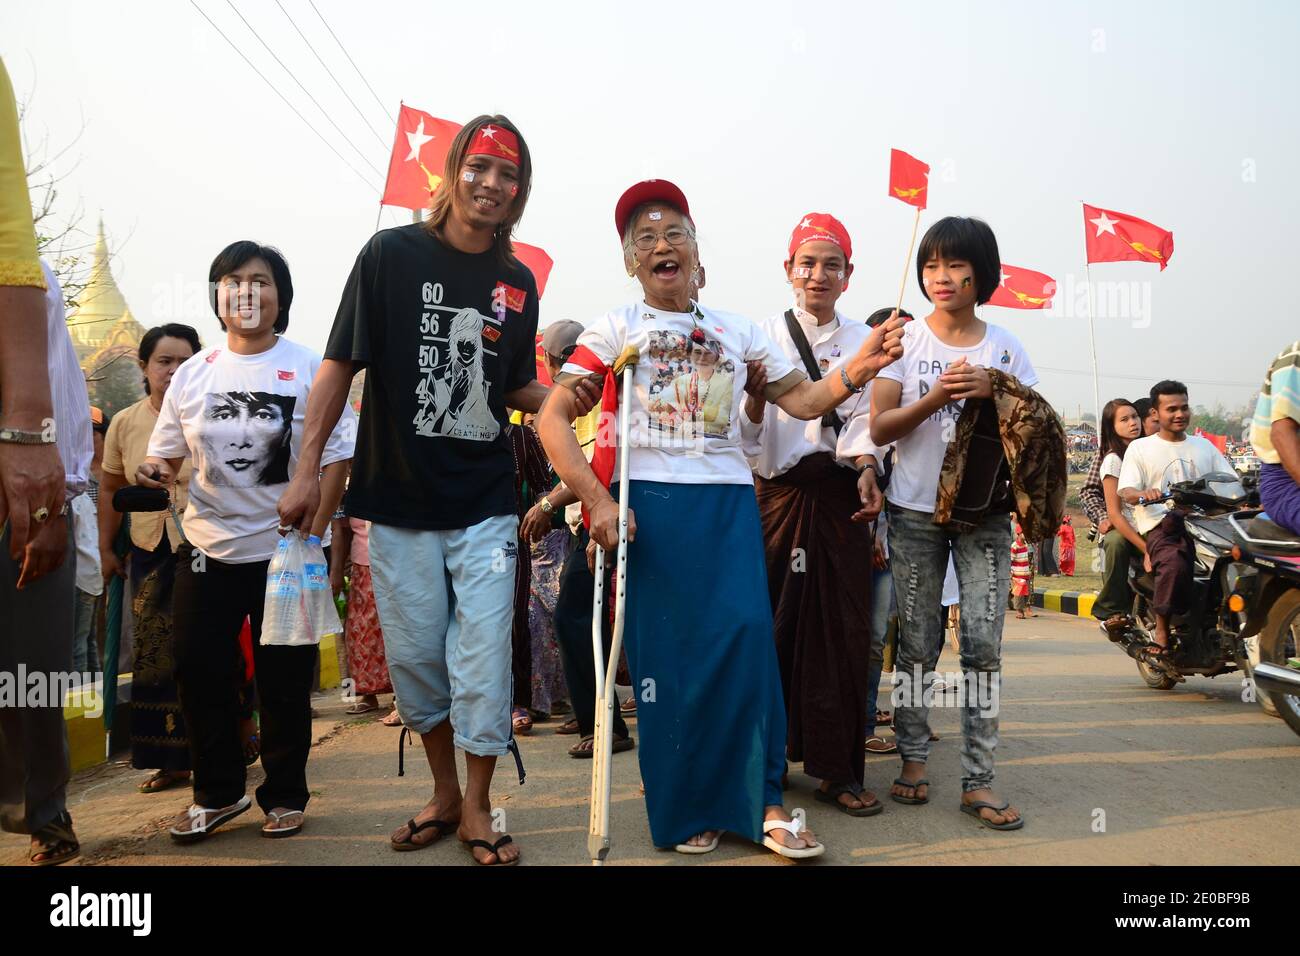 Supporters of all ages on their way to cheer Myanmar democracy campaigner Aung San Suu Kyi in front of Yandingaung pagoda in Lashi, Shan State. Lashio, Myanmar, on March 17, 2012. Photo by Christophe Loviny/ABACAPRESS.COM Stock Photo